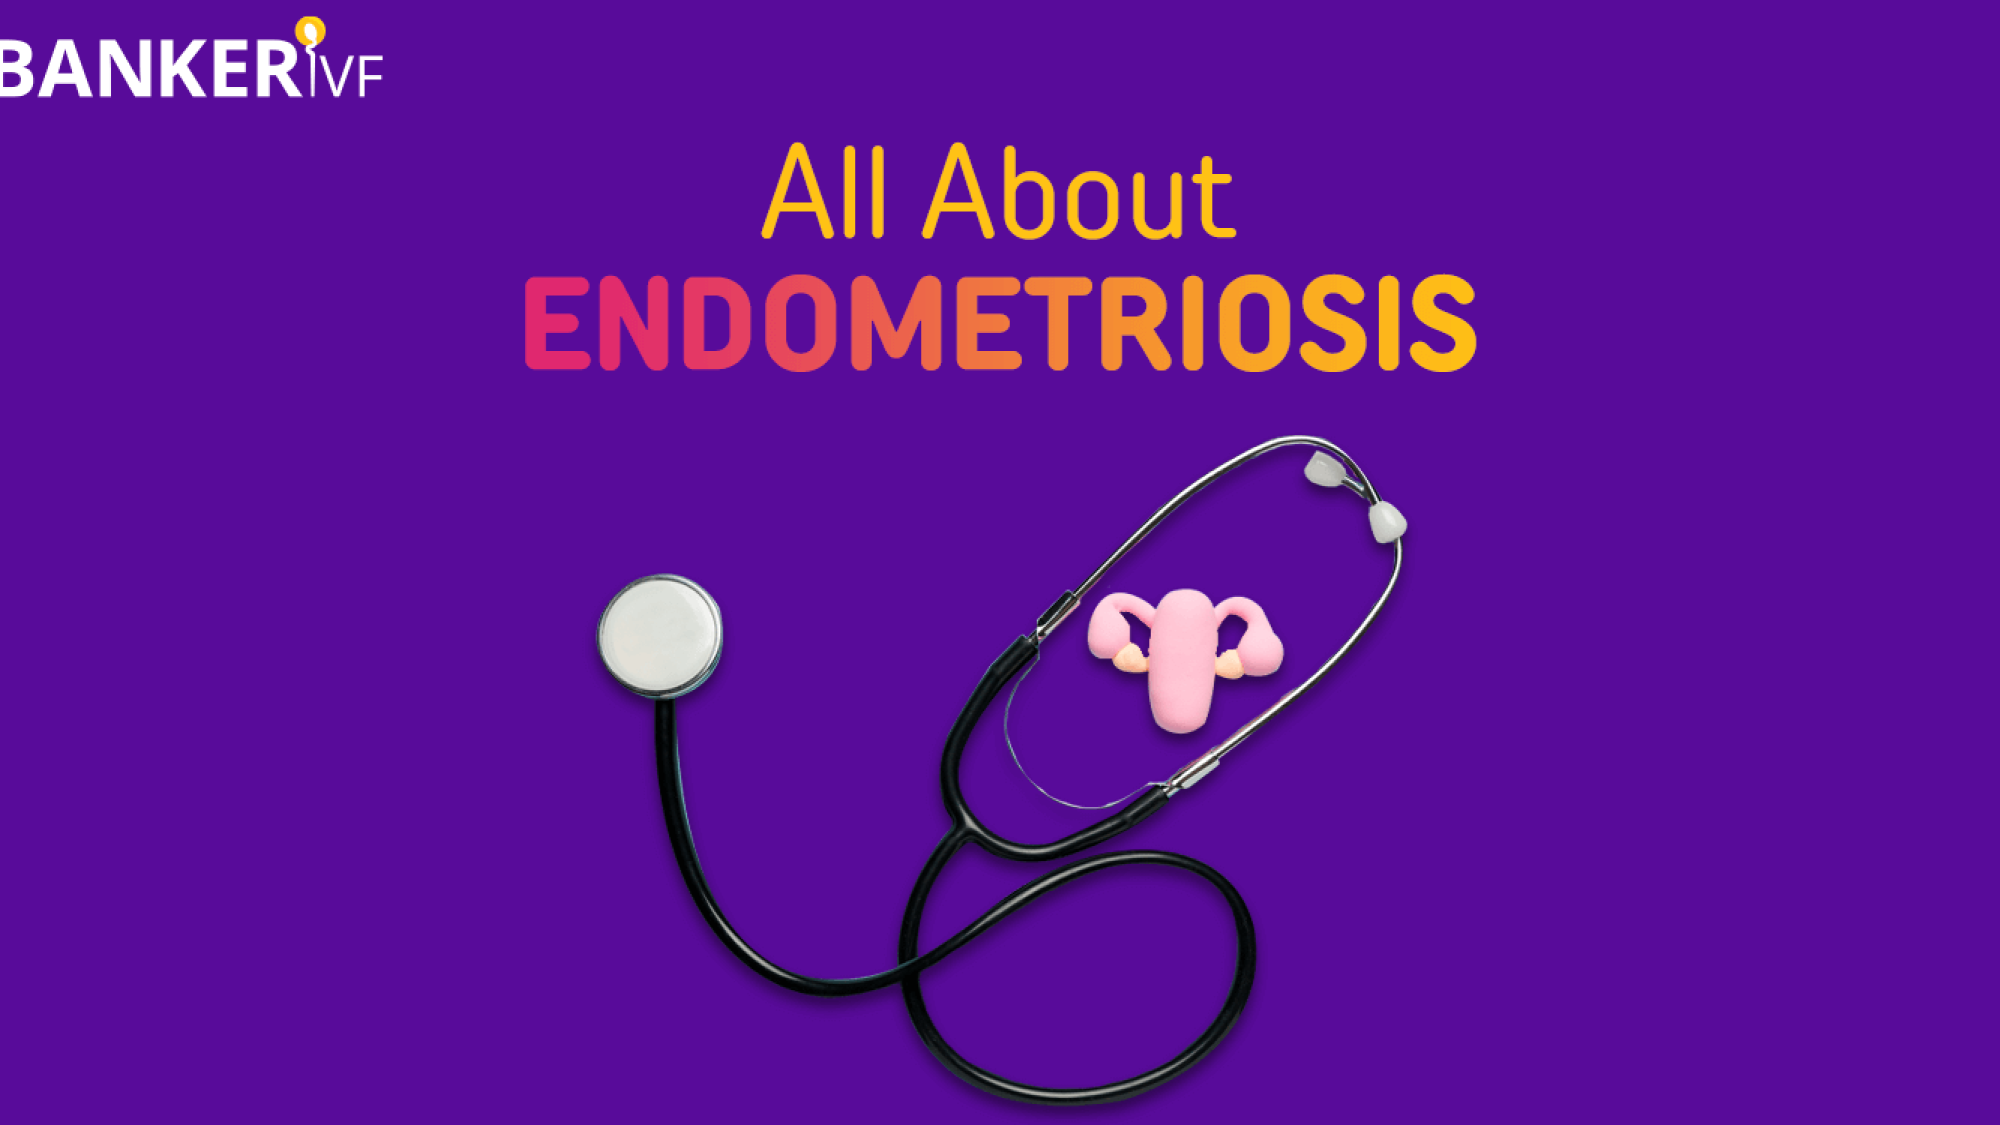 All-About-Endometriosis-Symptoms-Causes-Treatments-and-Much-More-Banker-IVF-01